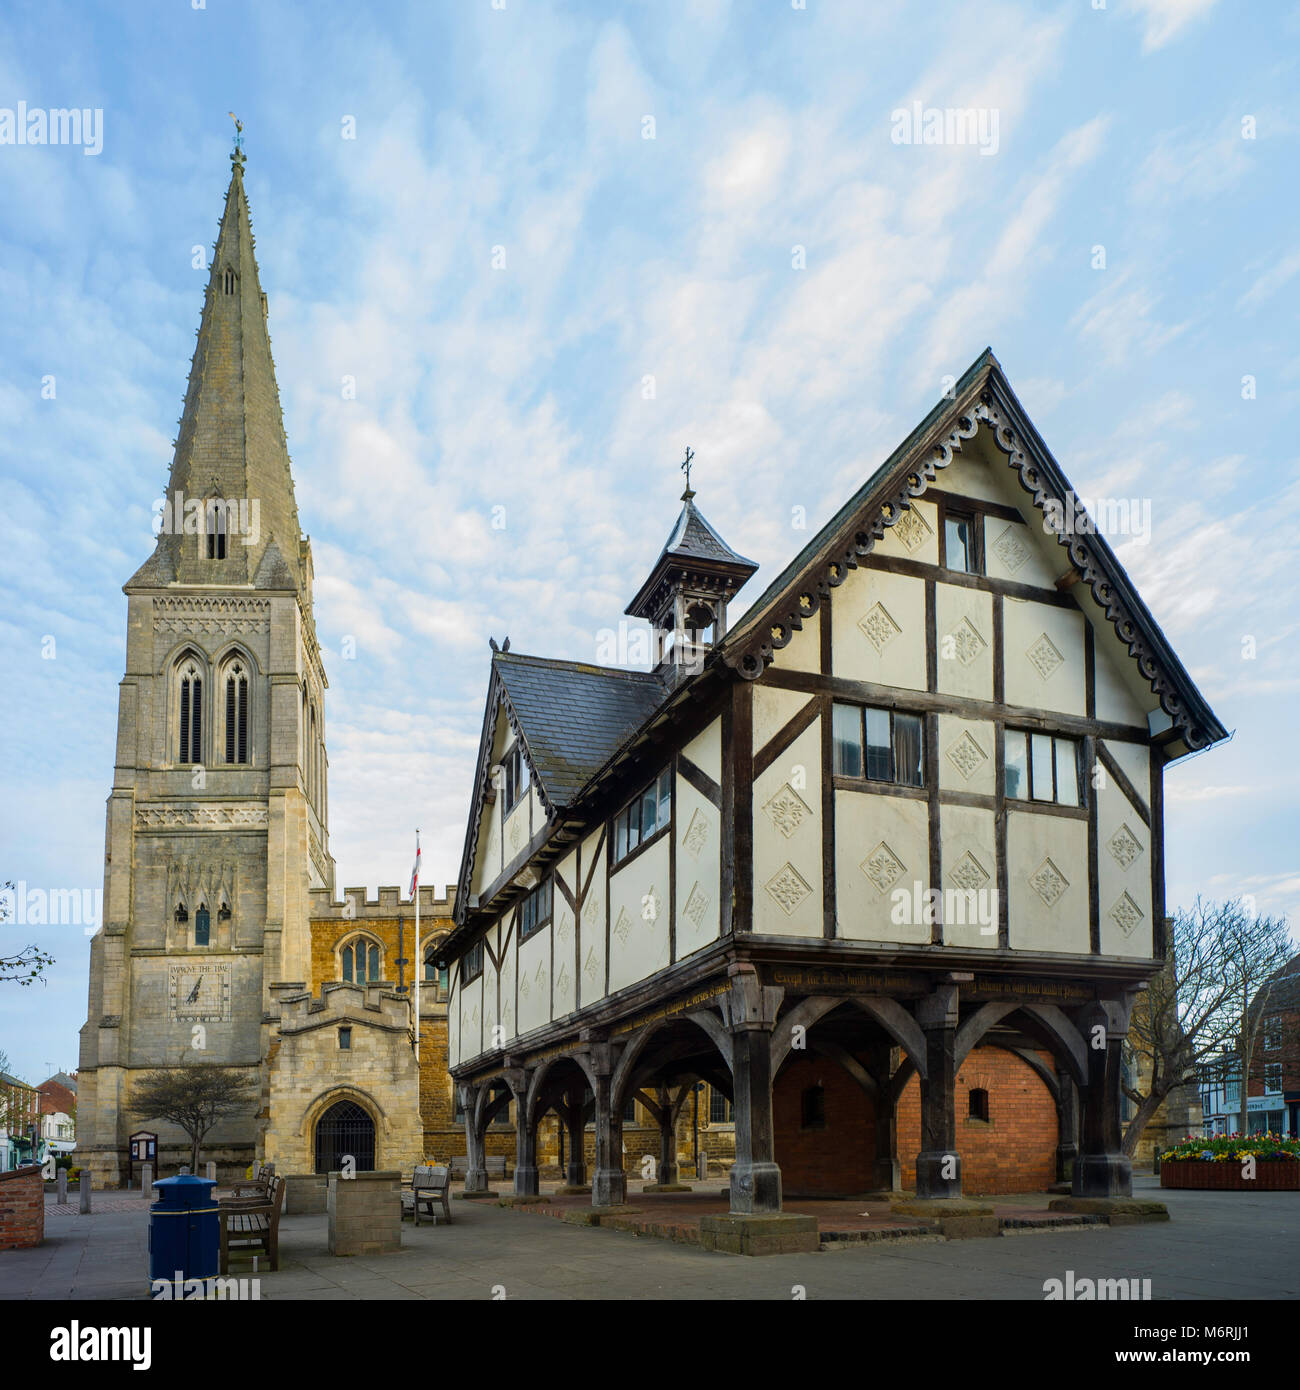 St. Dionysius Church and the Old Grammar School, Market Harborough. Both buildings are listed Grade 1. Stock Photo